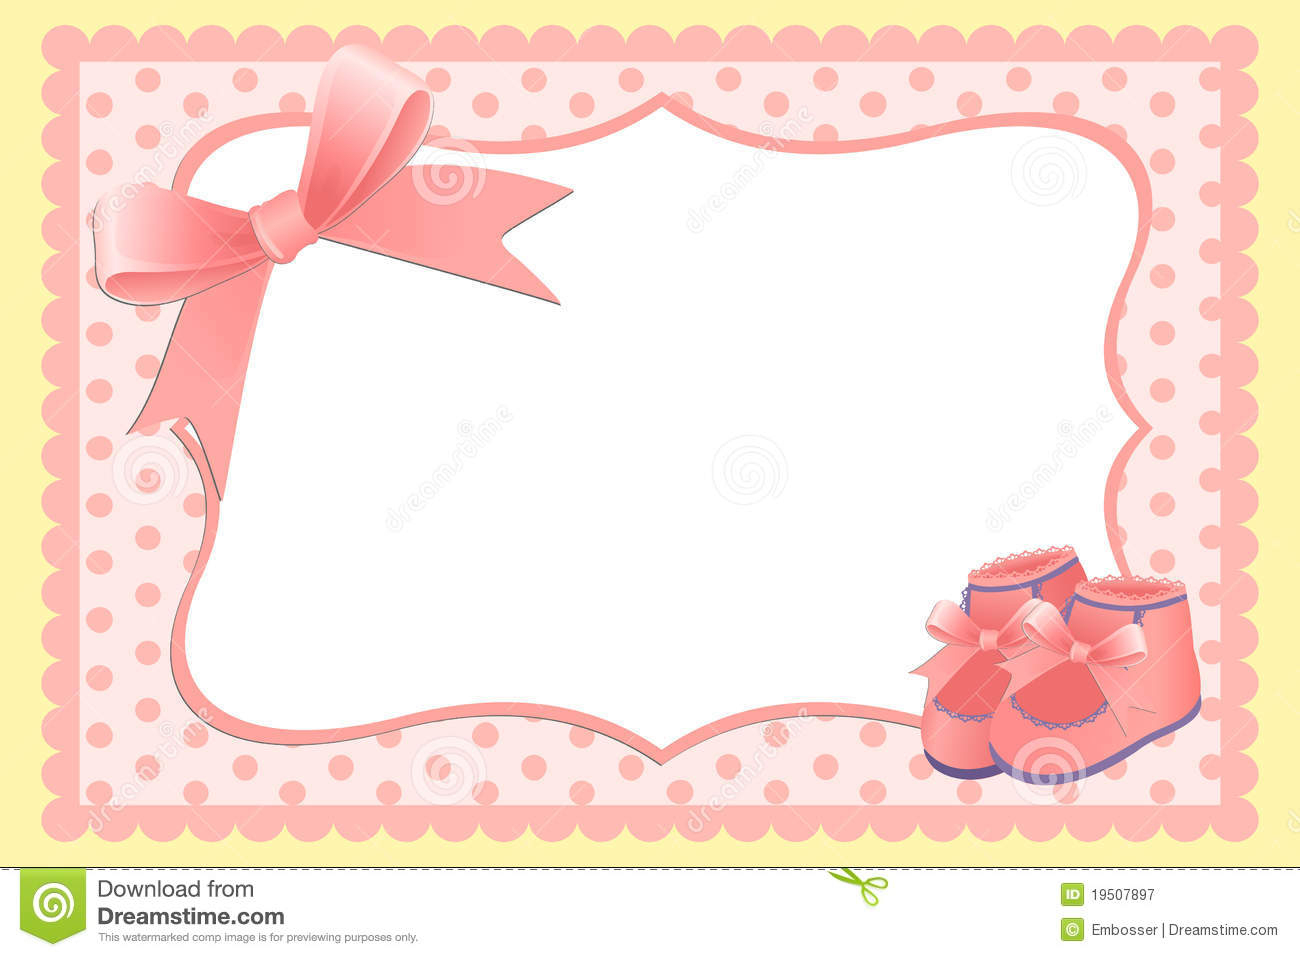 001 Template Ideas Free Printable Baby Cards Templates Cute S Card - Free Printable Baby Cards Templates